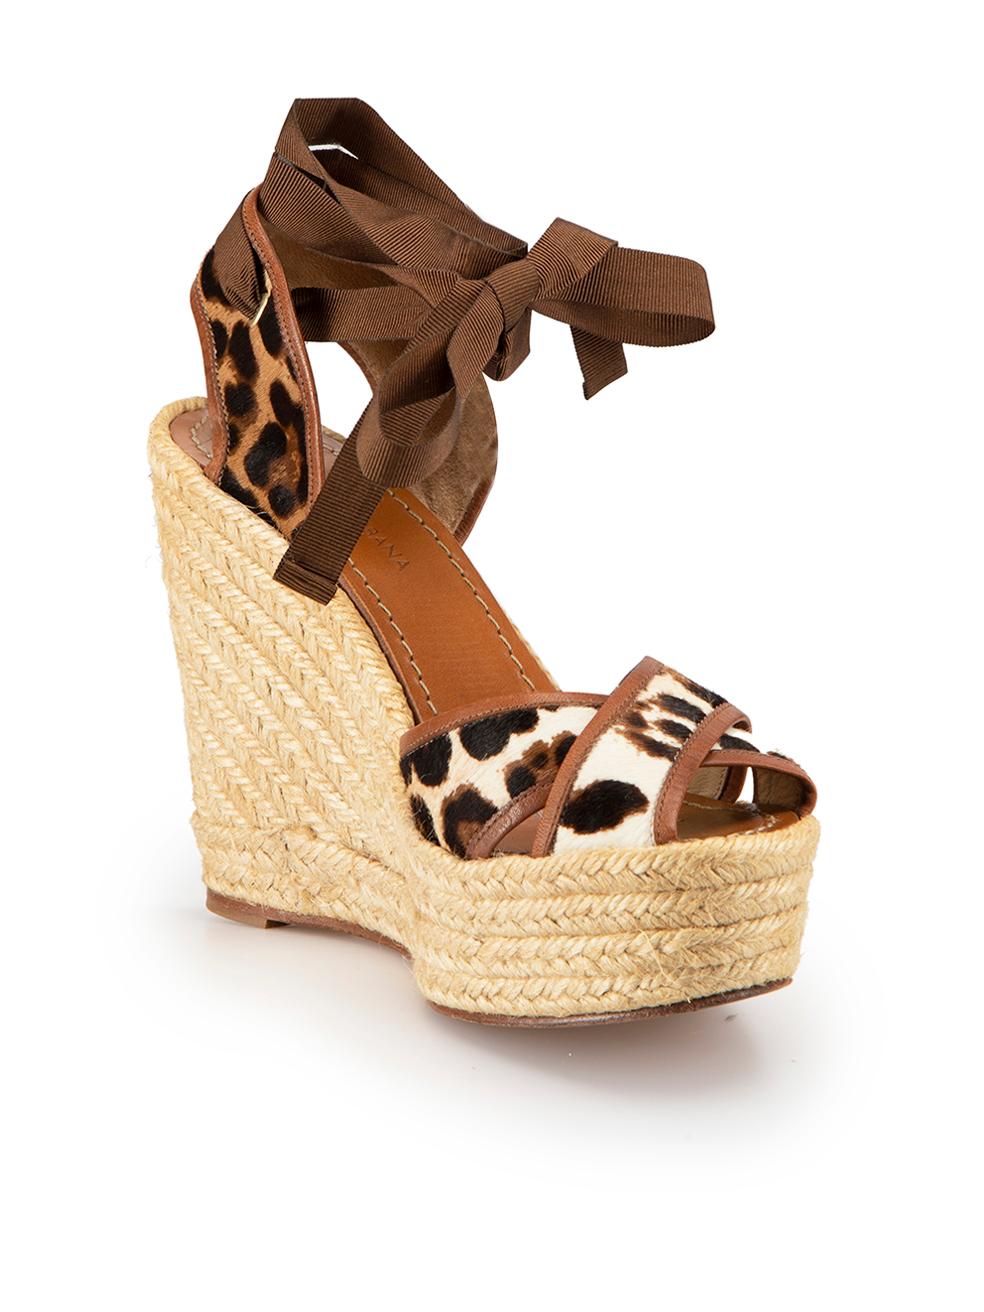 CONDITION is Very good. Minimal wear to shoes is evident. Minimal wear to both wedge heels with scuff marks on this used Dolce & Gabbana designer resale item.



Details


Brown

Pony hair

Espadrille wedges

High heeled

Leopard